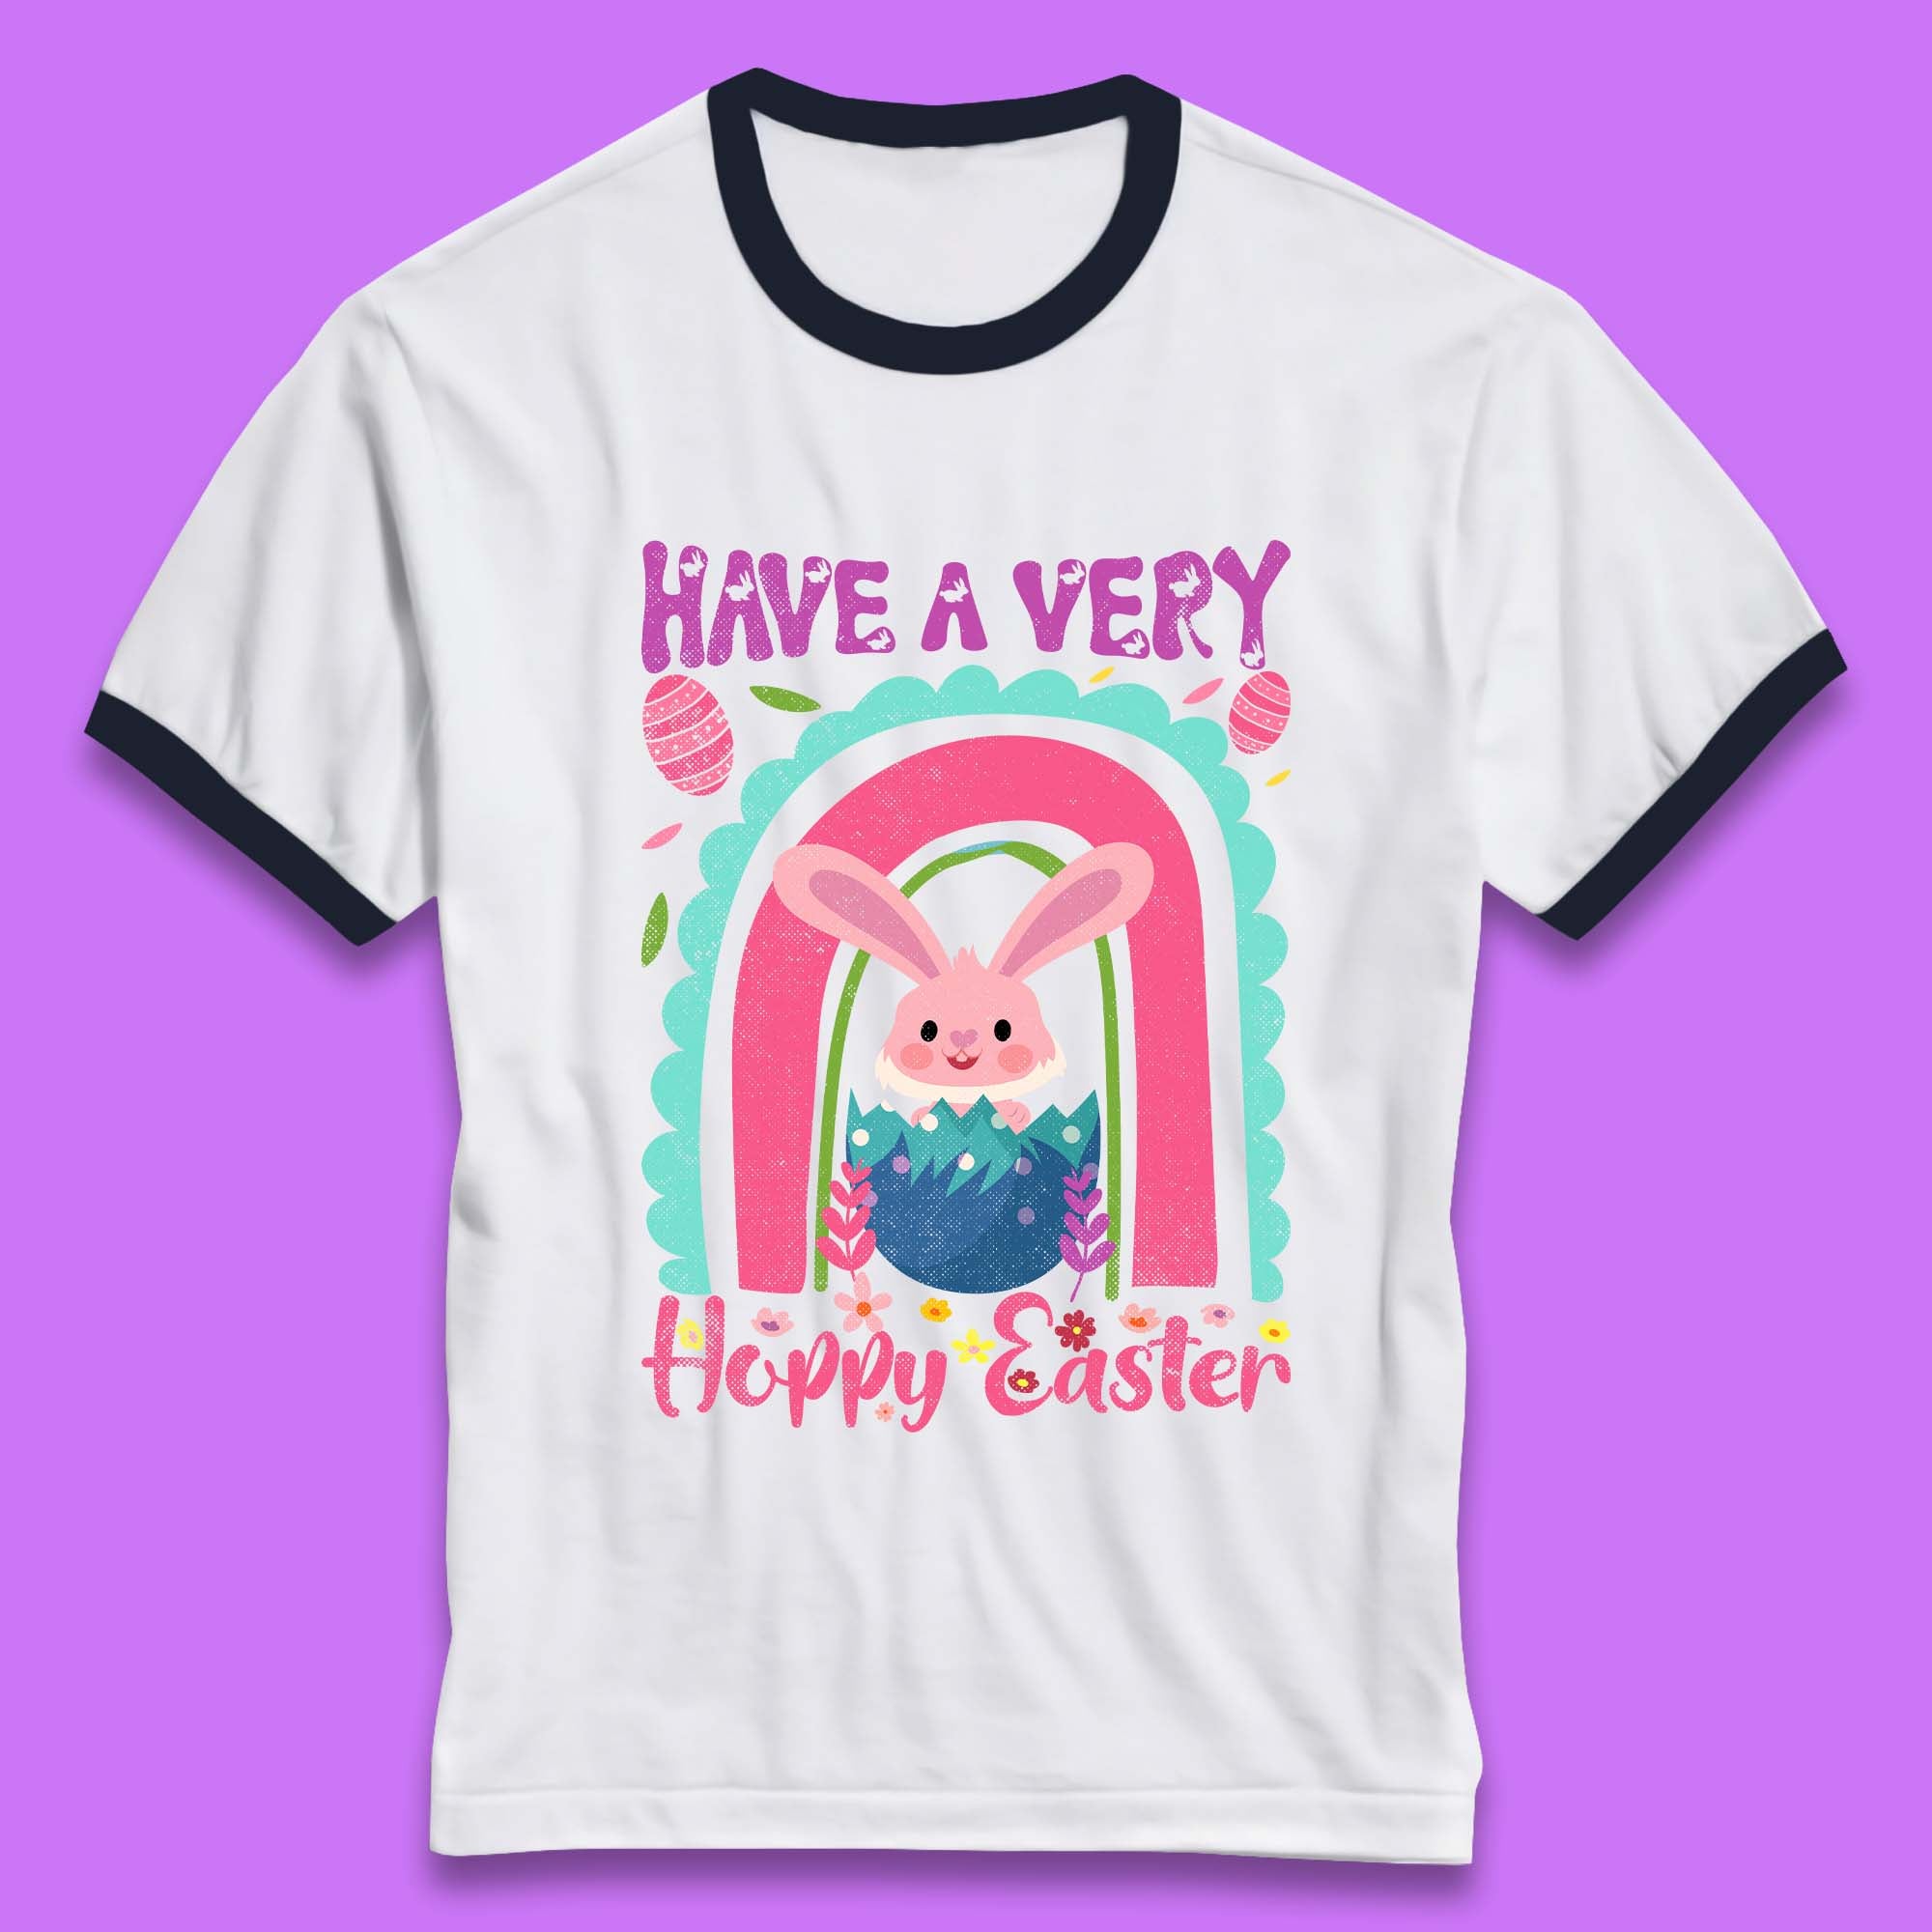 Have A Very Happy Easter Ringer T-Shirt